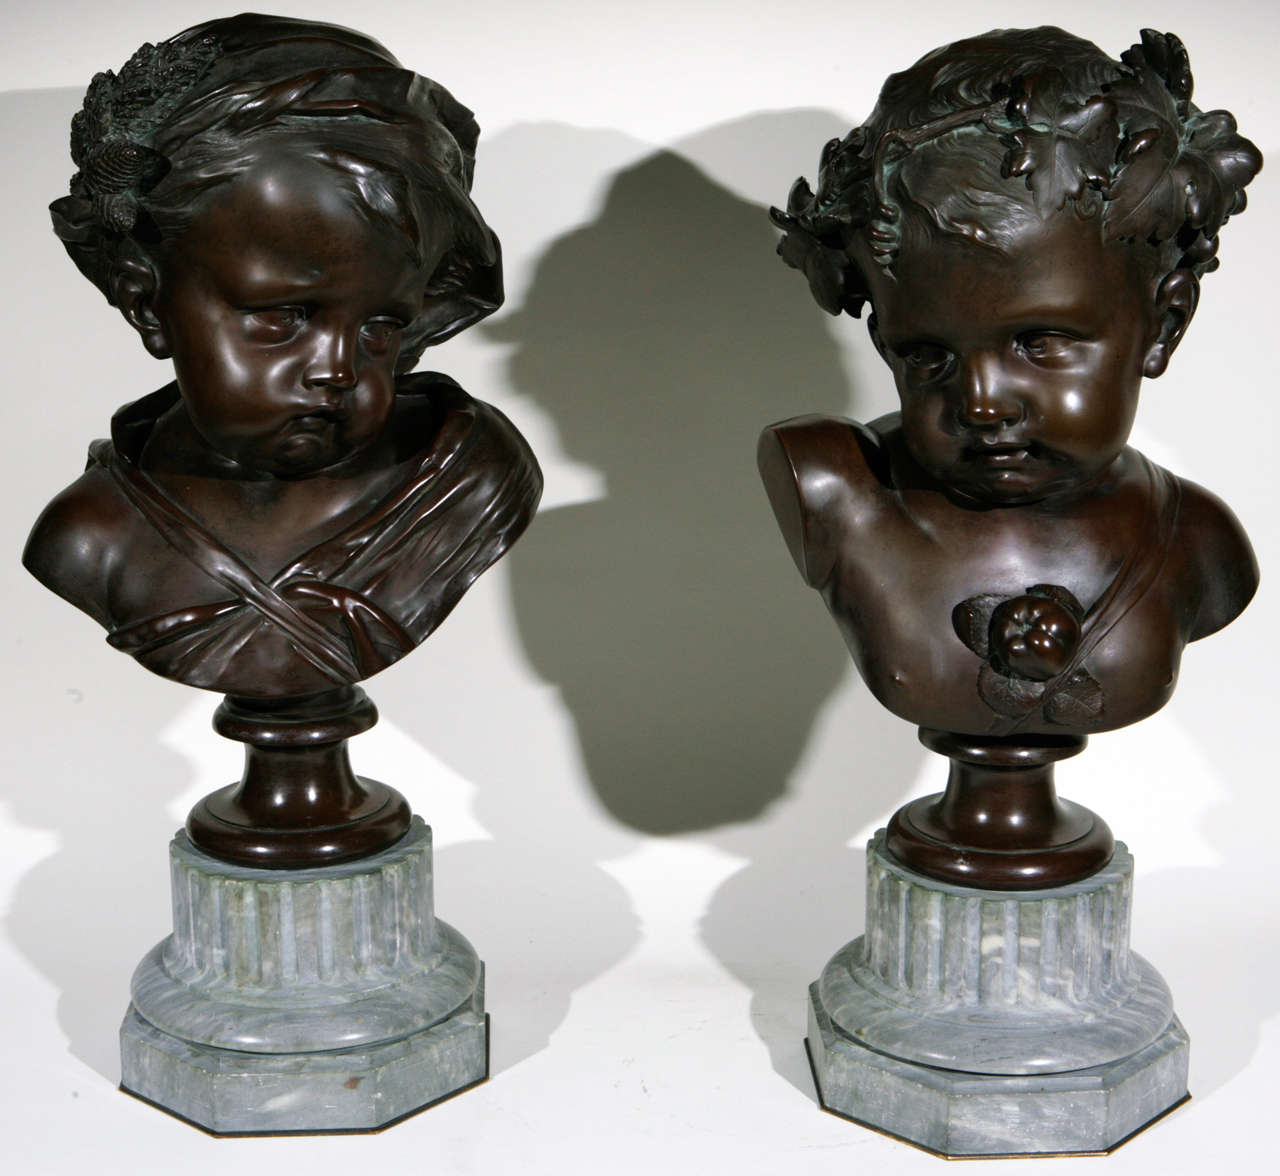 Pair of Very Fine 19th c. French Bronze Busts of Children on Original Gray Marble Bases. The base measurement is 8 inches.